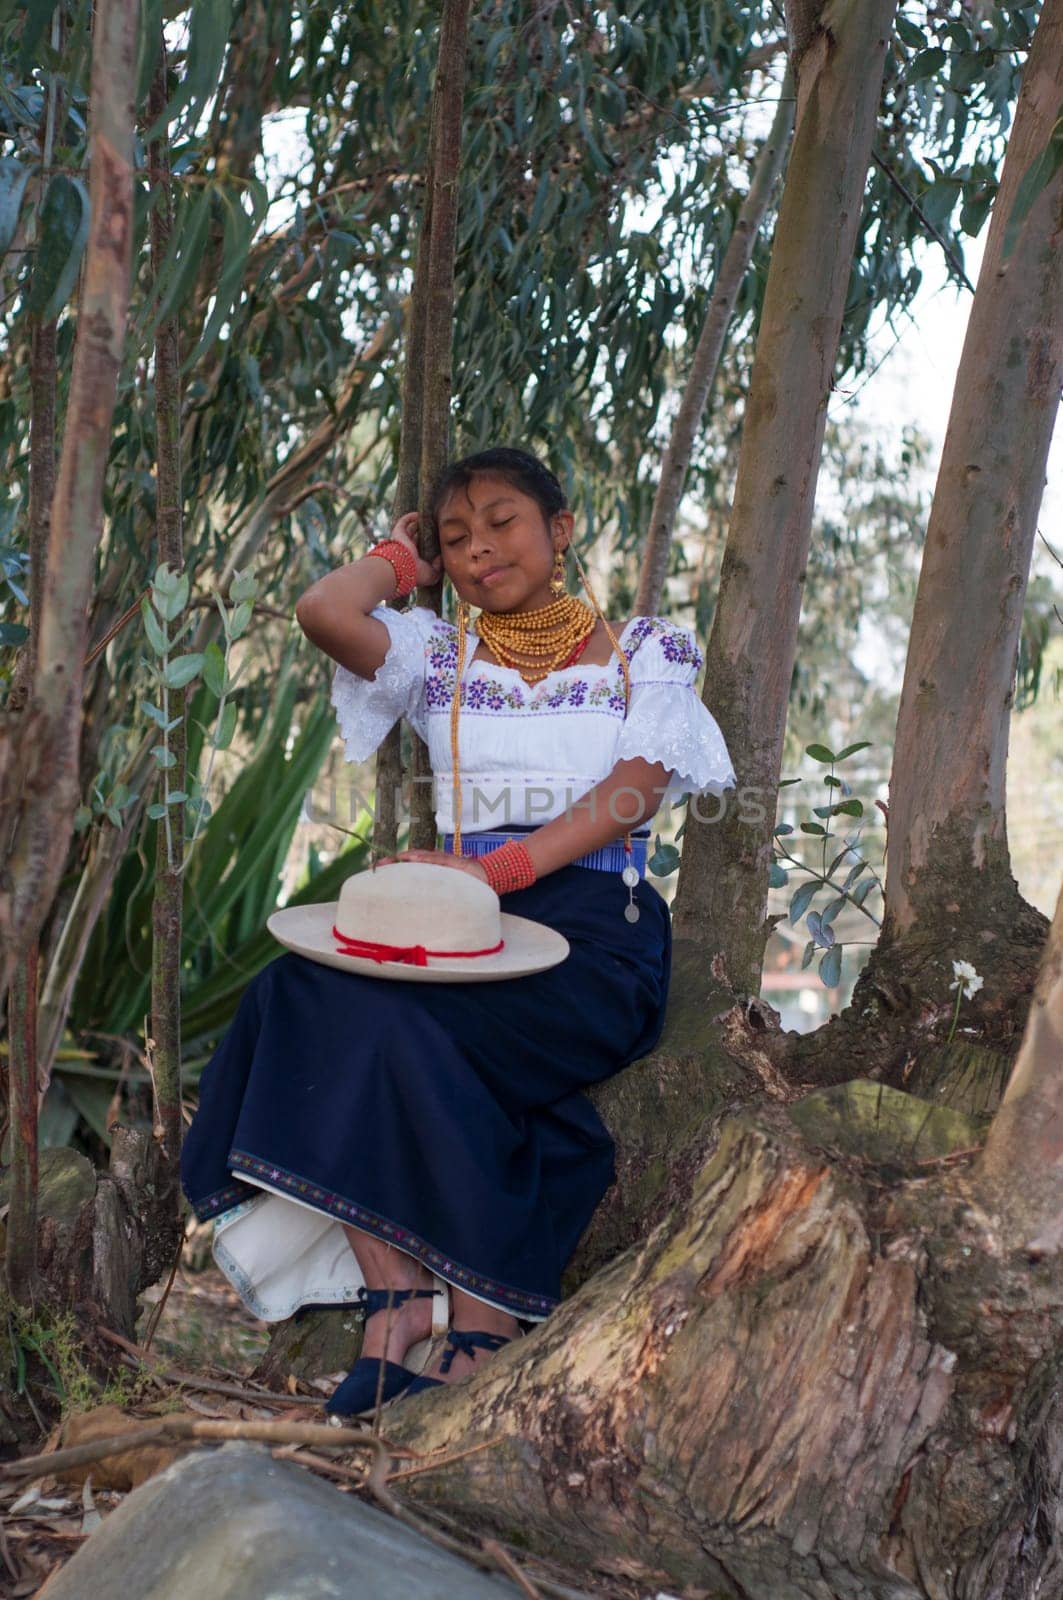 Serenity in Tradition: Indigenous Woman Napping on an Amazon Tree by Raulmartin